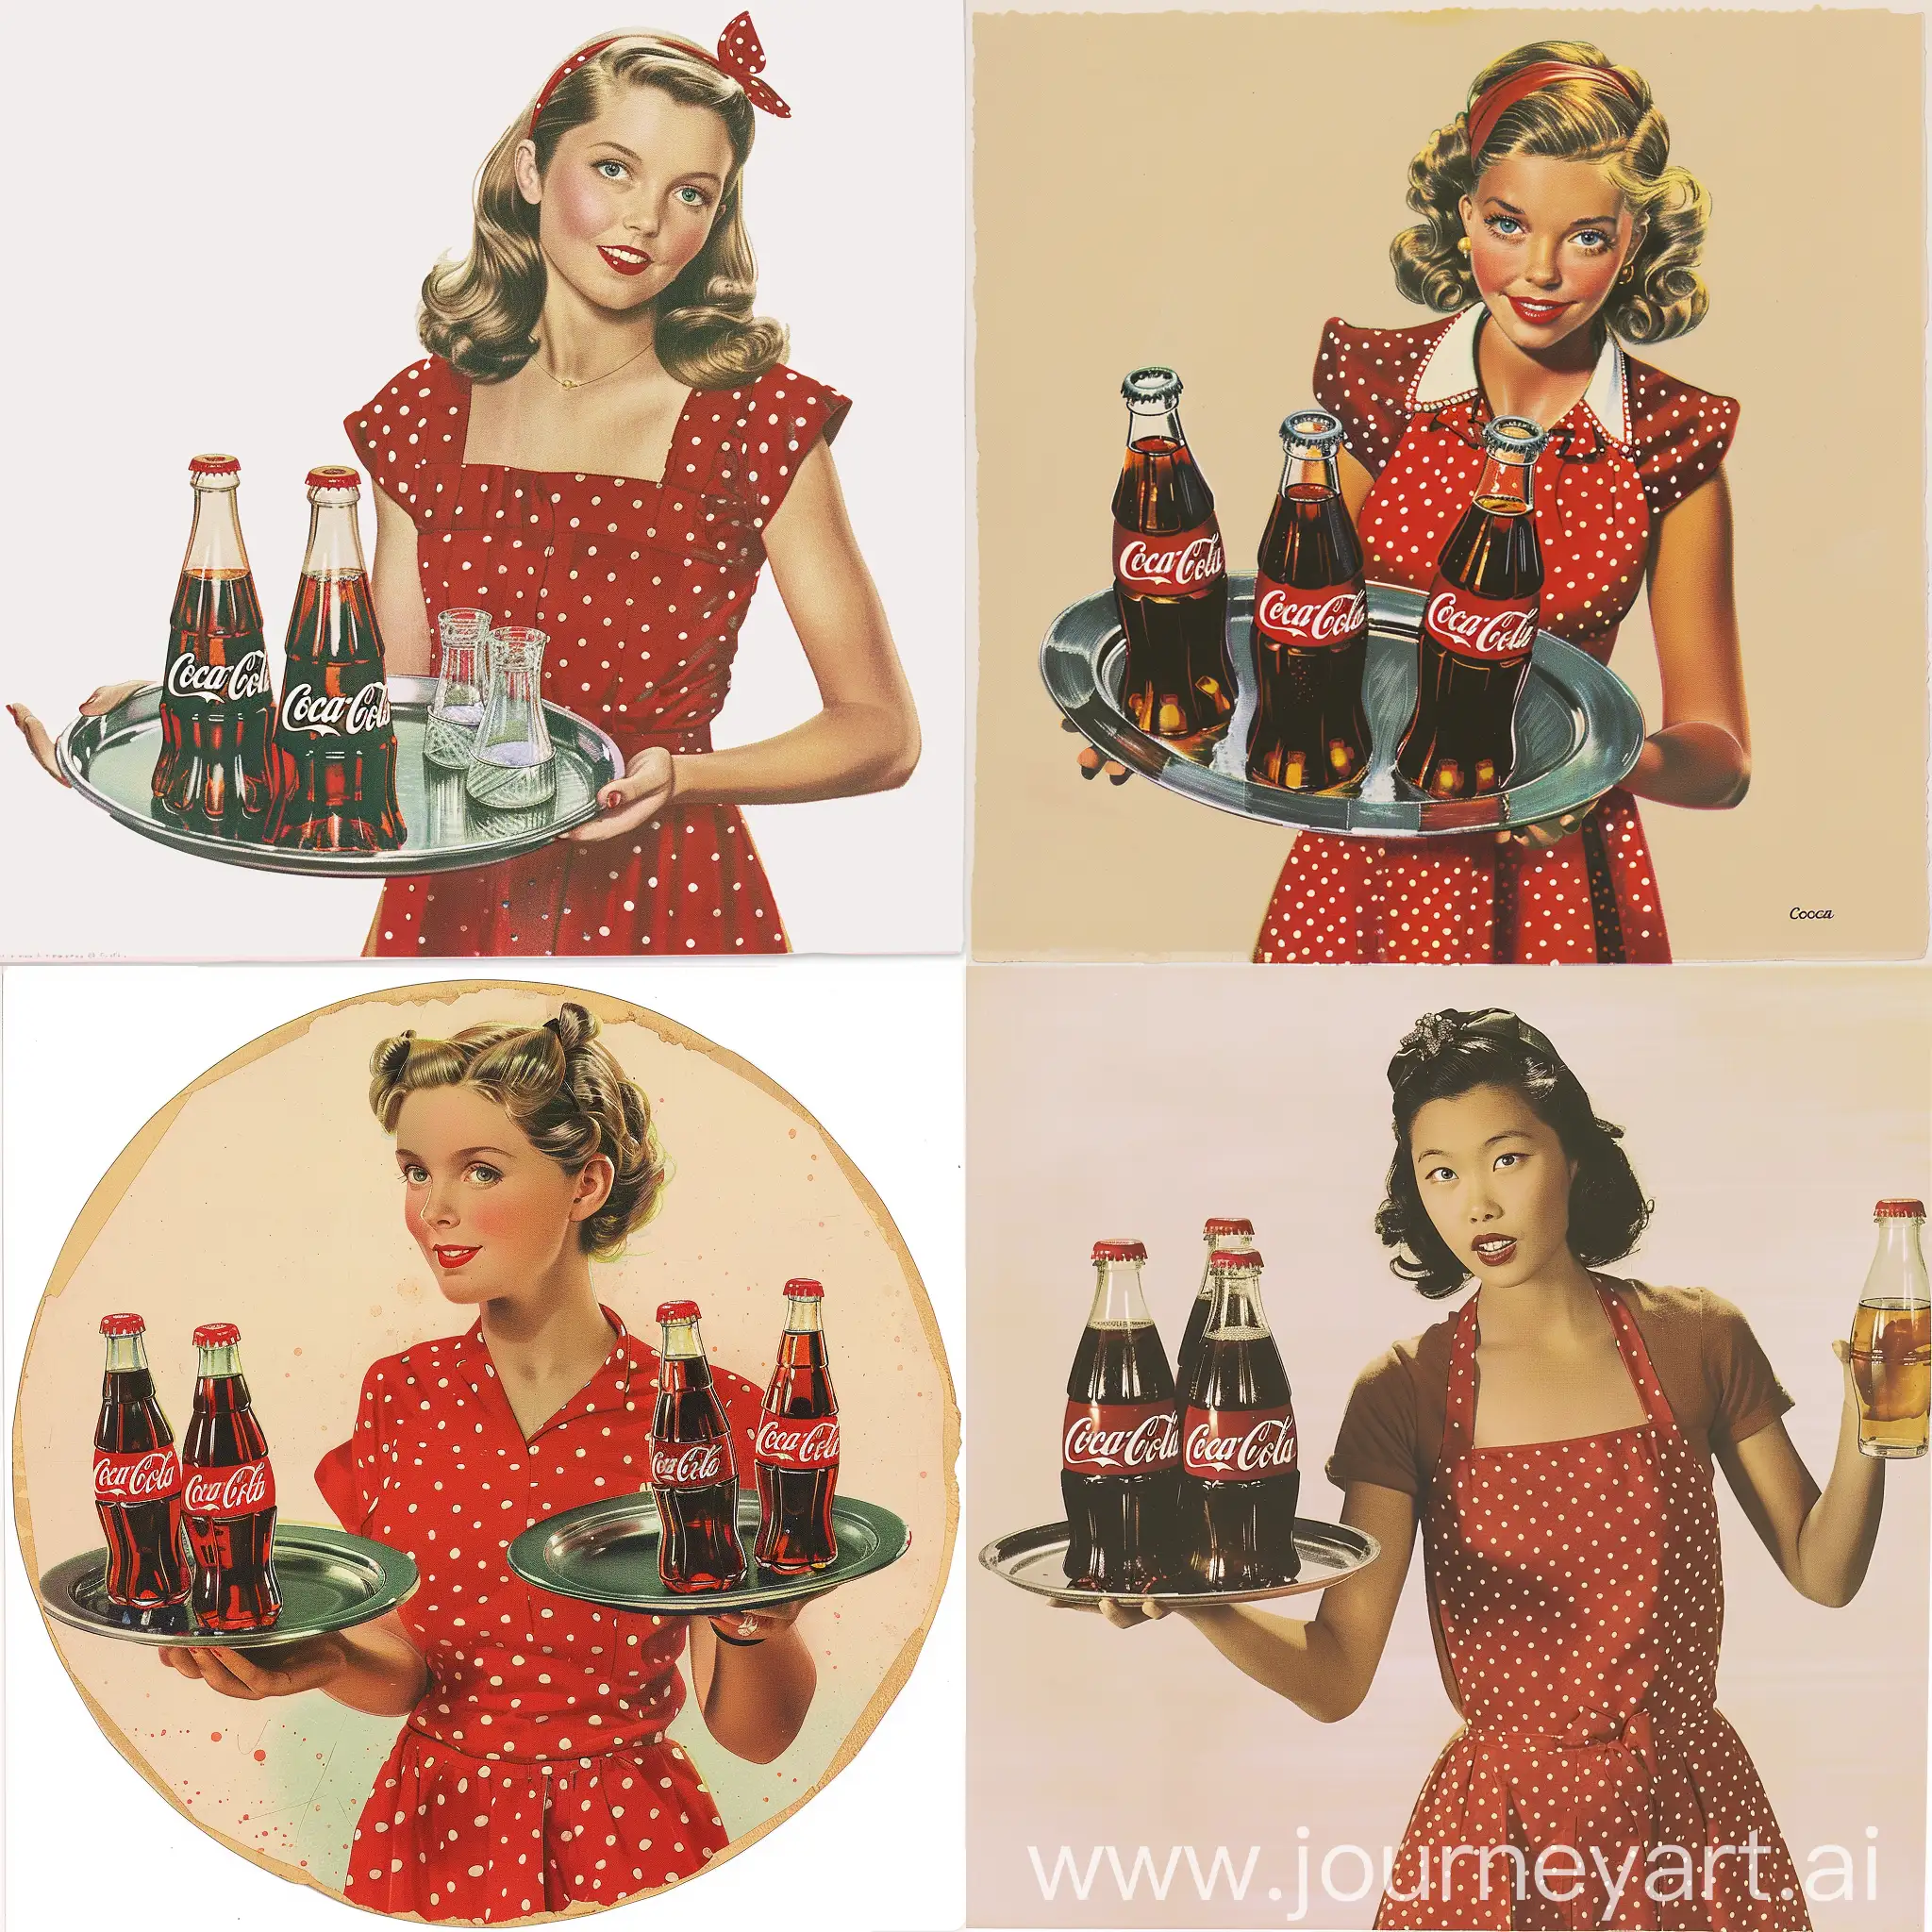 Waitress-Serving-CocaCola-in-Red-Polka-Dot-Dress